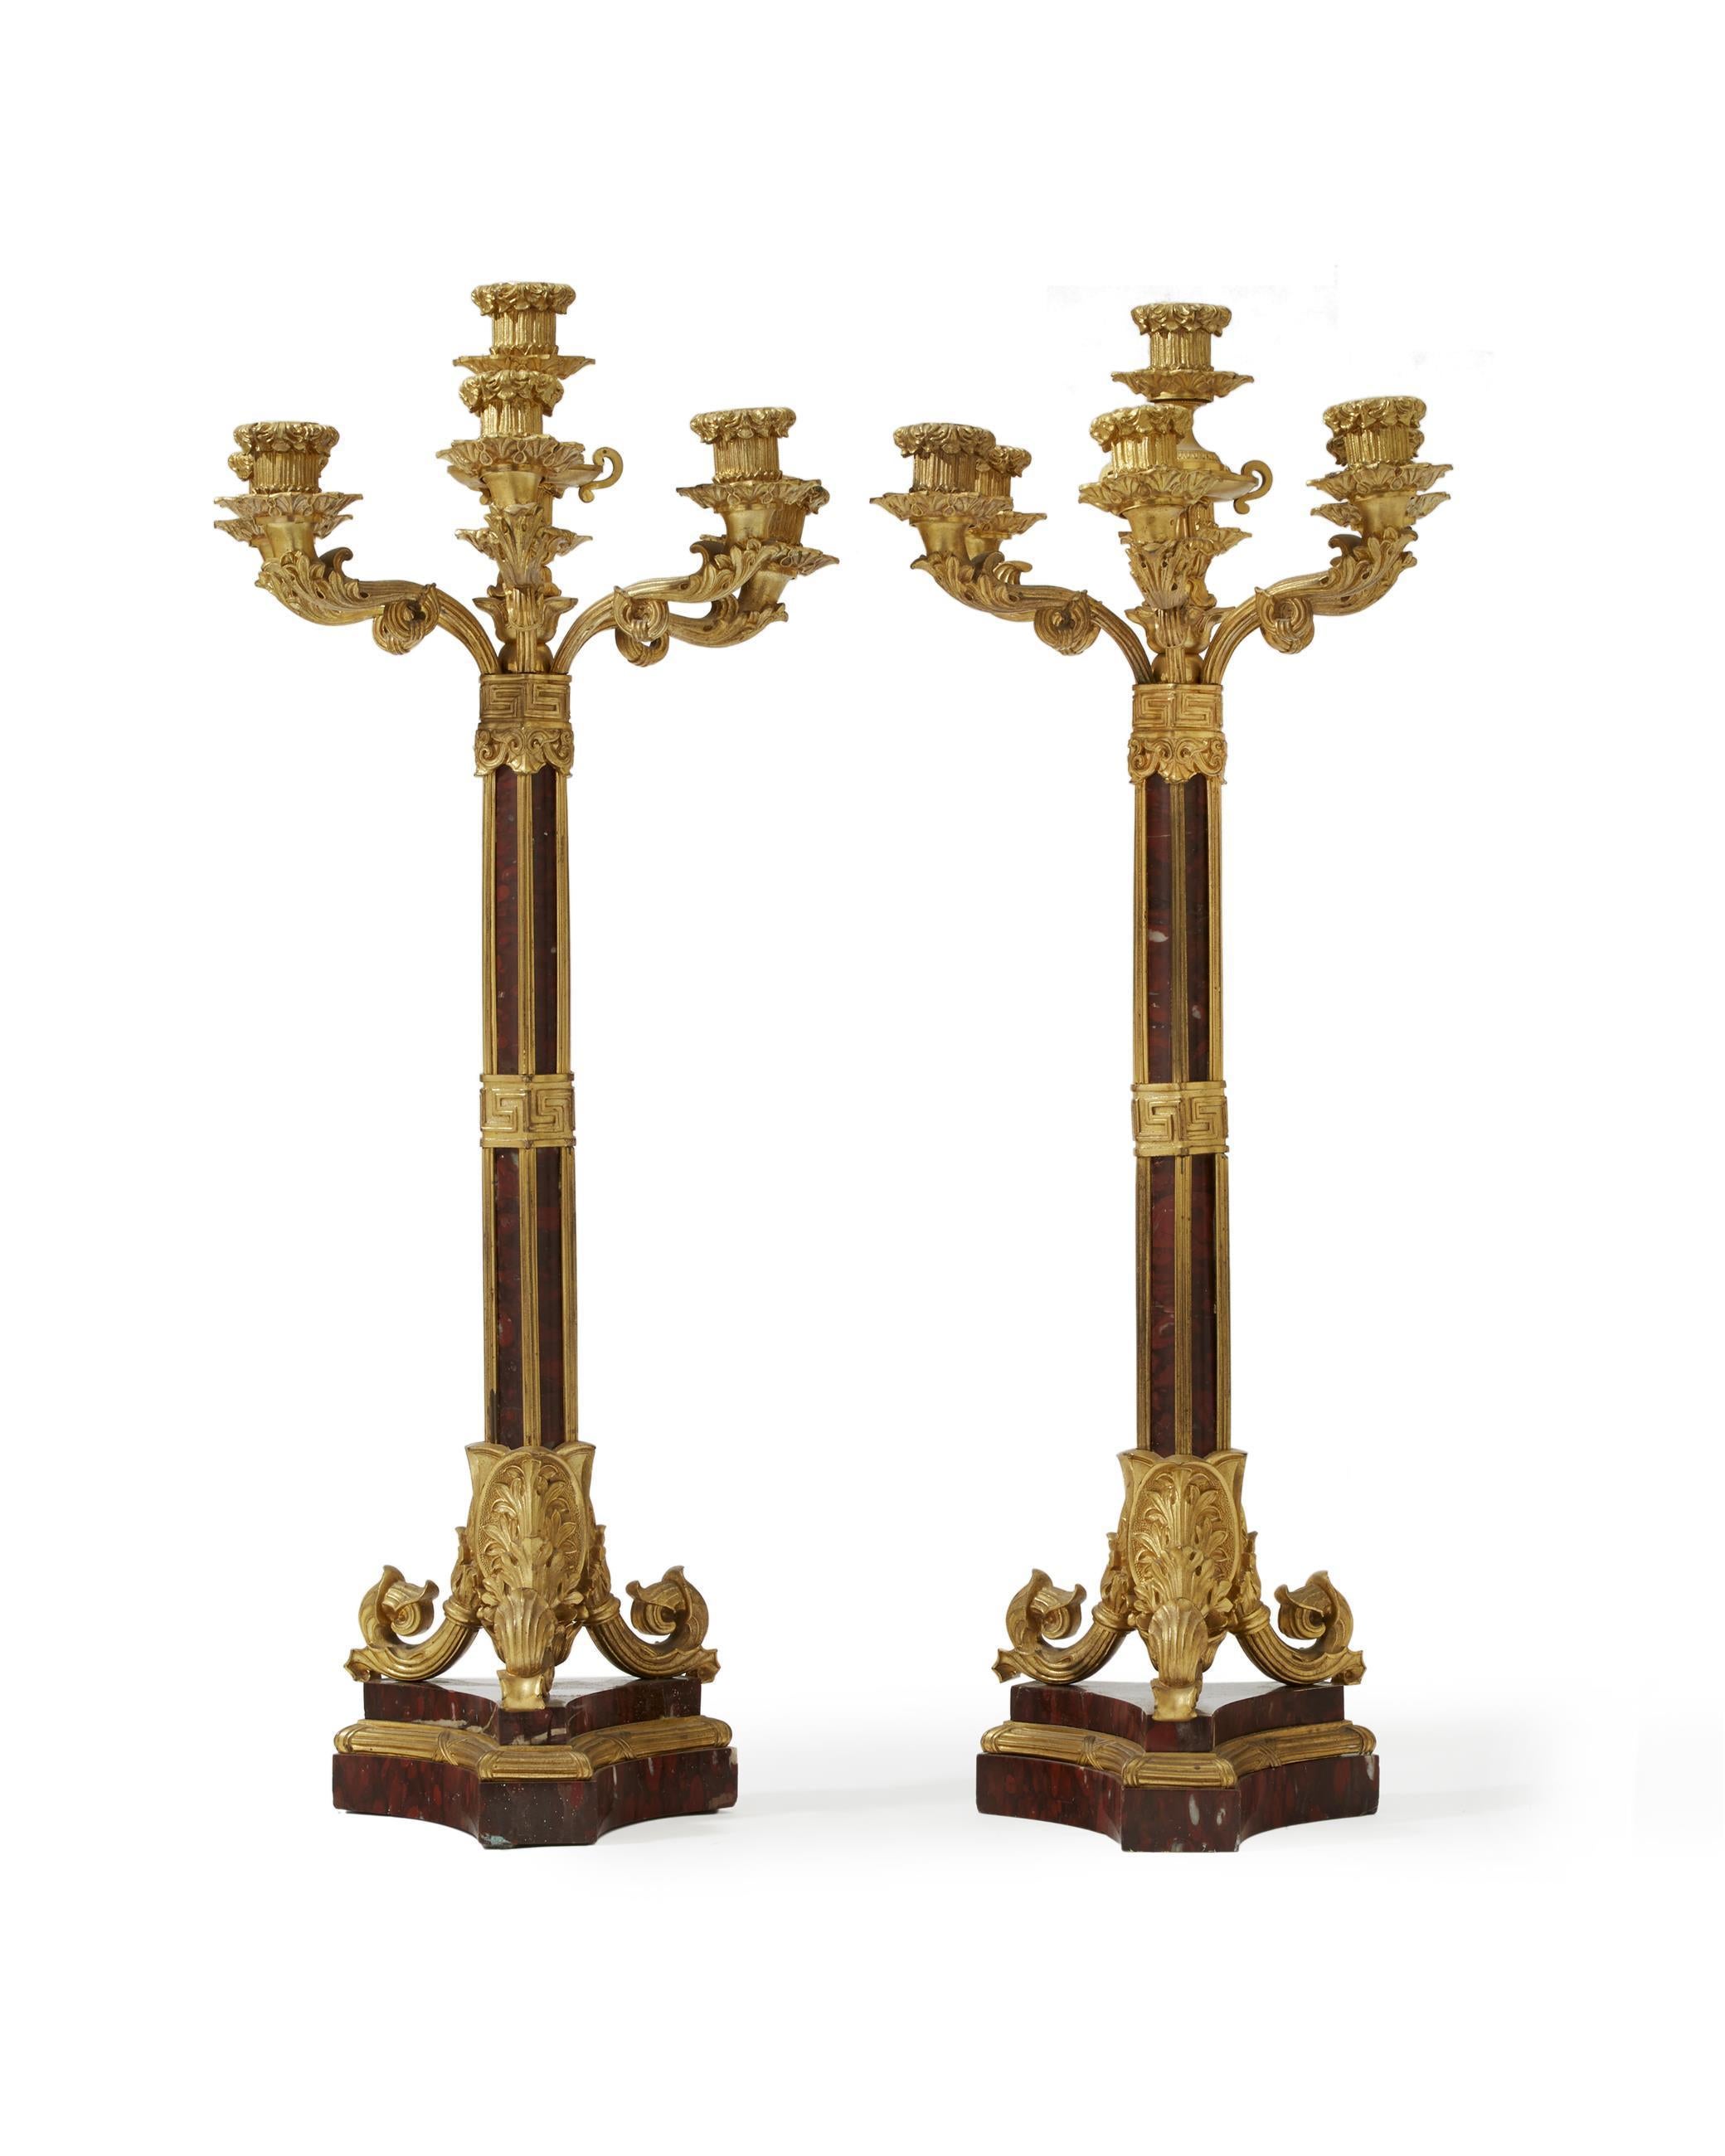 Unique pair of French ormolu and rouge marble candelabra.
Late 19th century. 

The candelabra is with seven foliate-inspired arms terminating in gilt bronze dishpan and candleholder, above a mixed rouge marble and ormolu shaft decorated in Greek